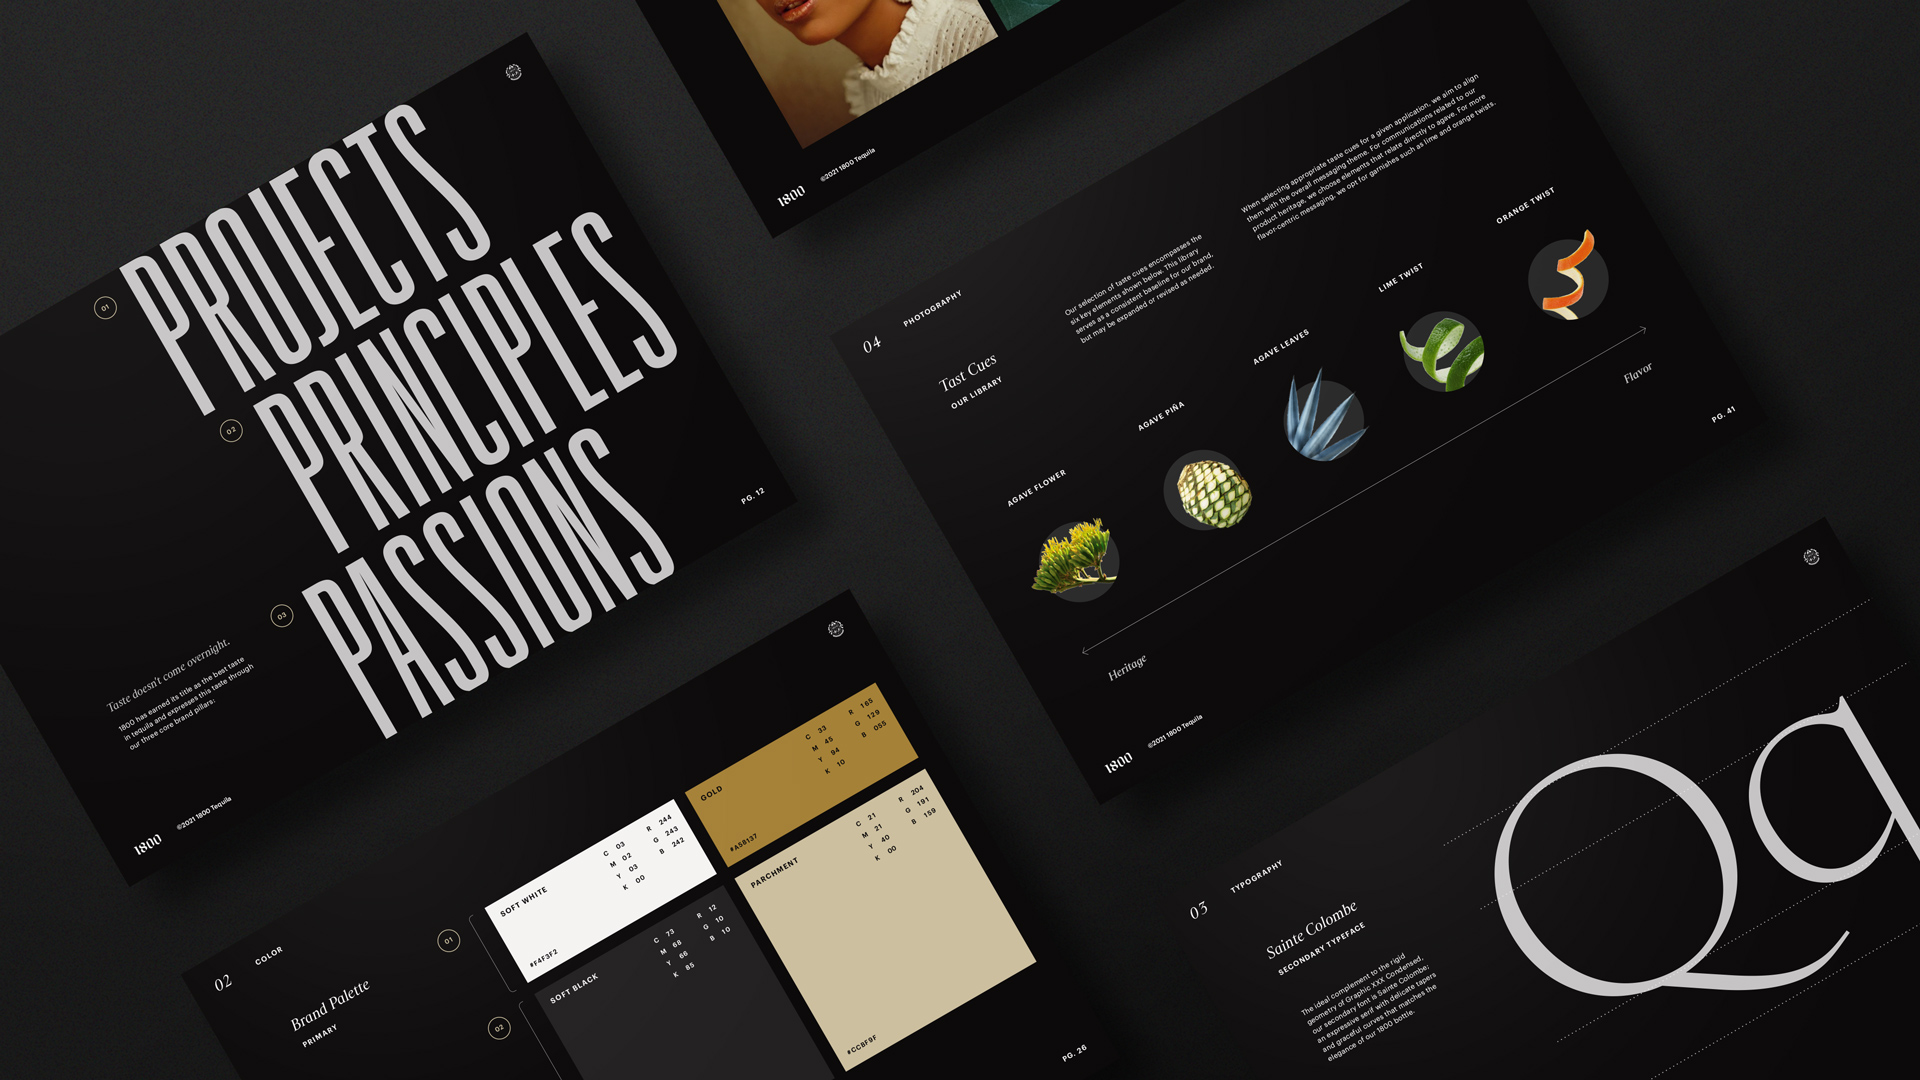 1800 Tequila brand guidelines with color palette and brand principles.